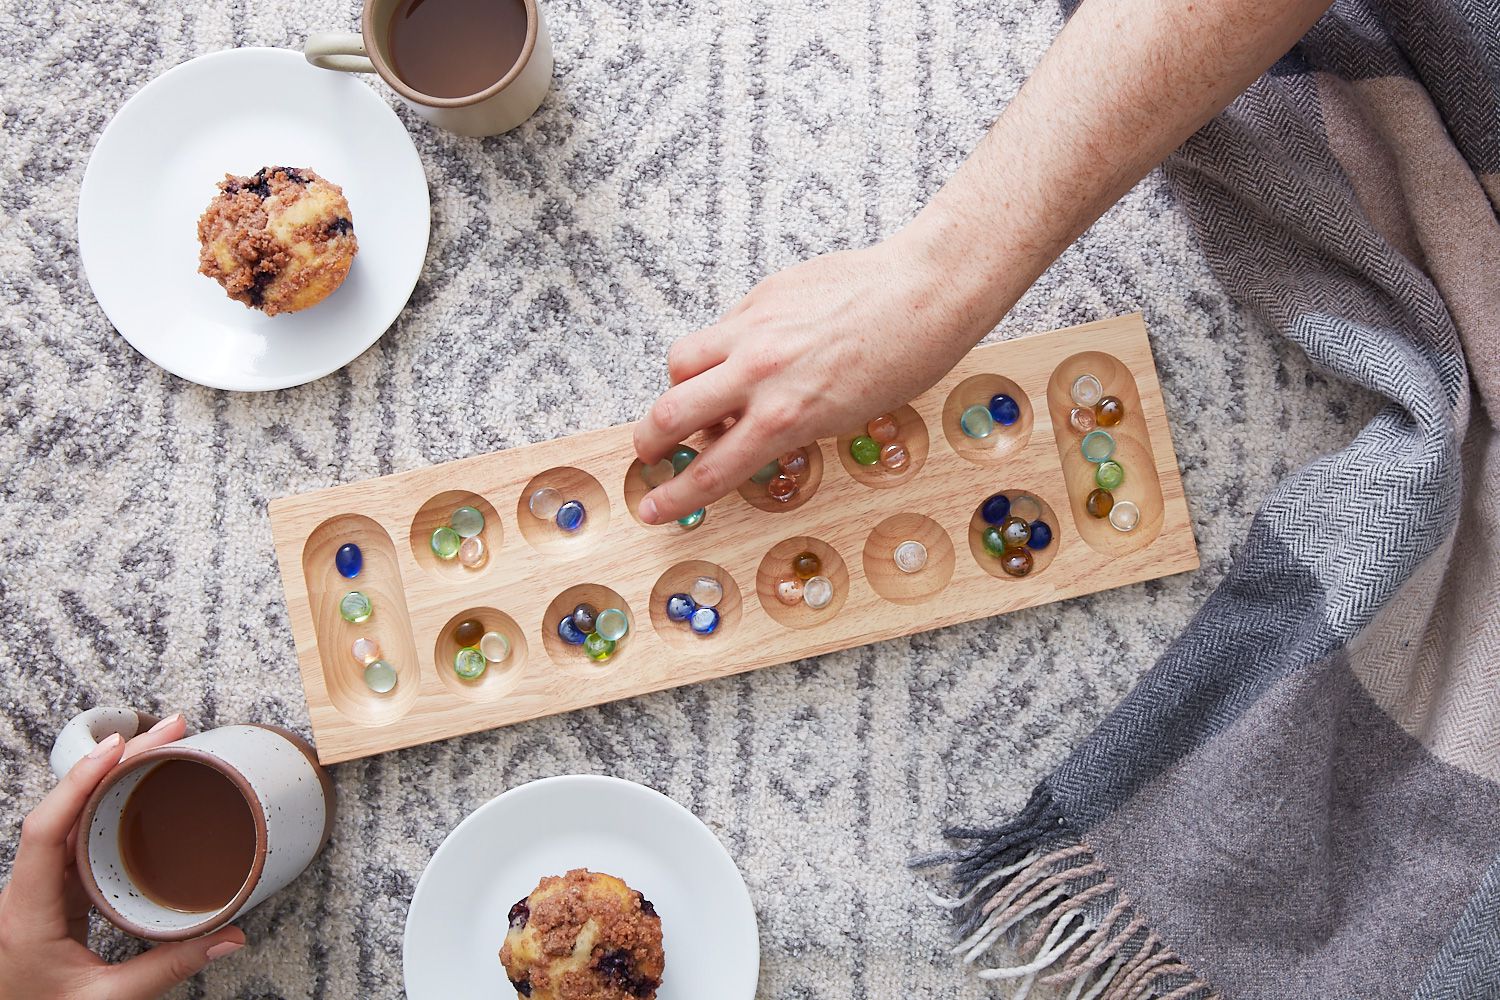 How to play Mancala, one of the oldest board games: rules and strategies to apply